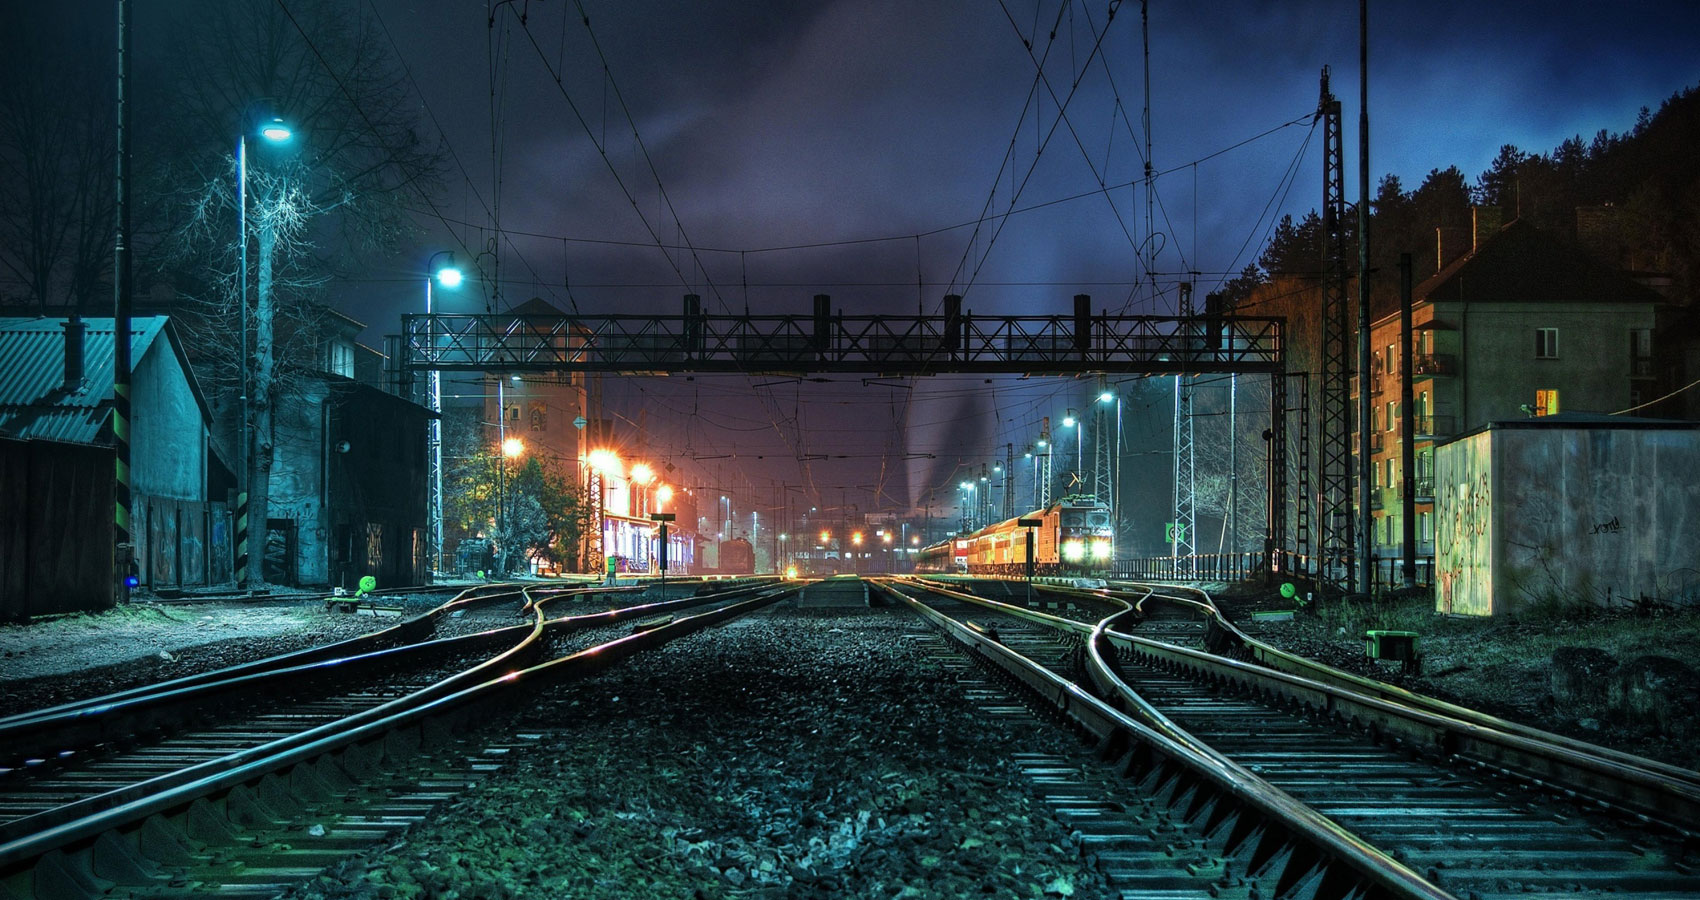 Night in the Train Station by Matt Dunn at Spillwords.com